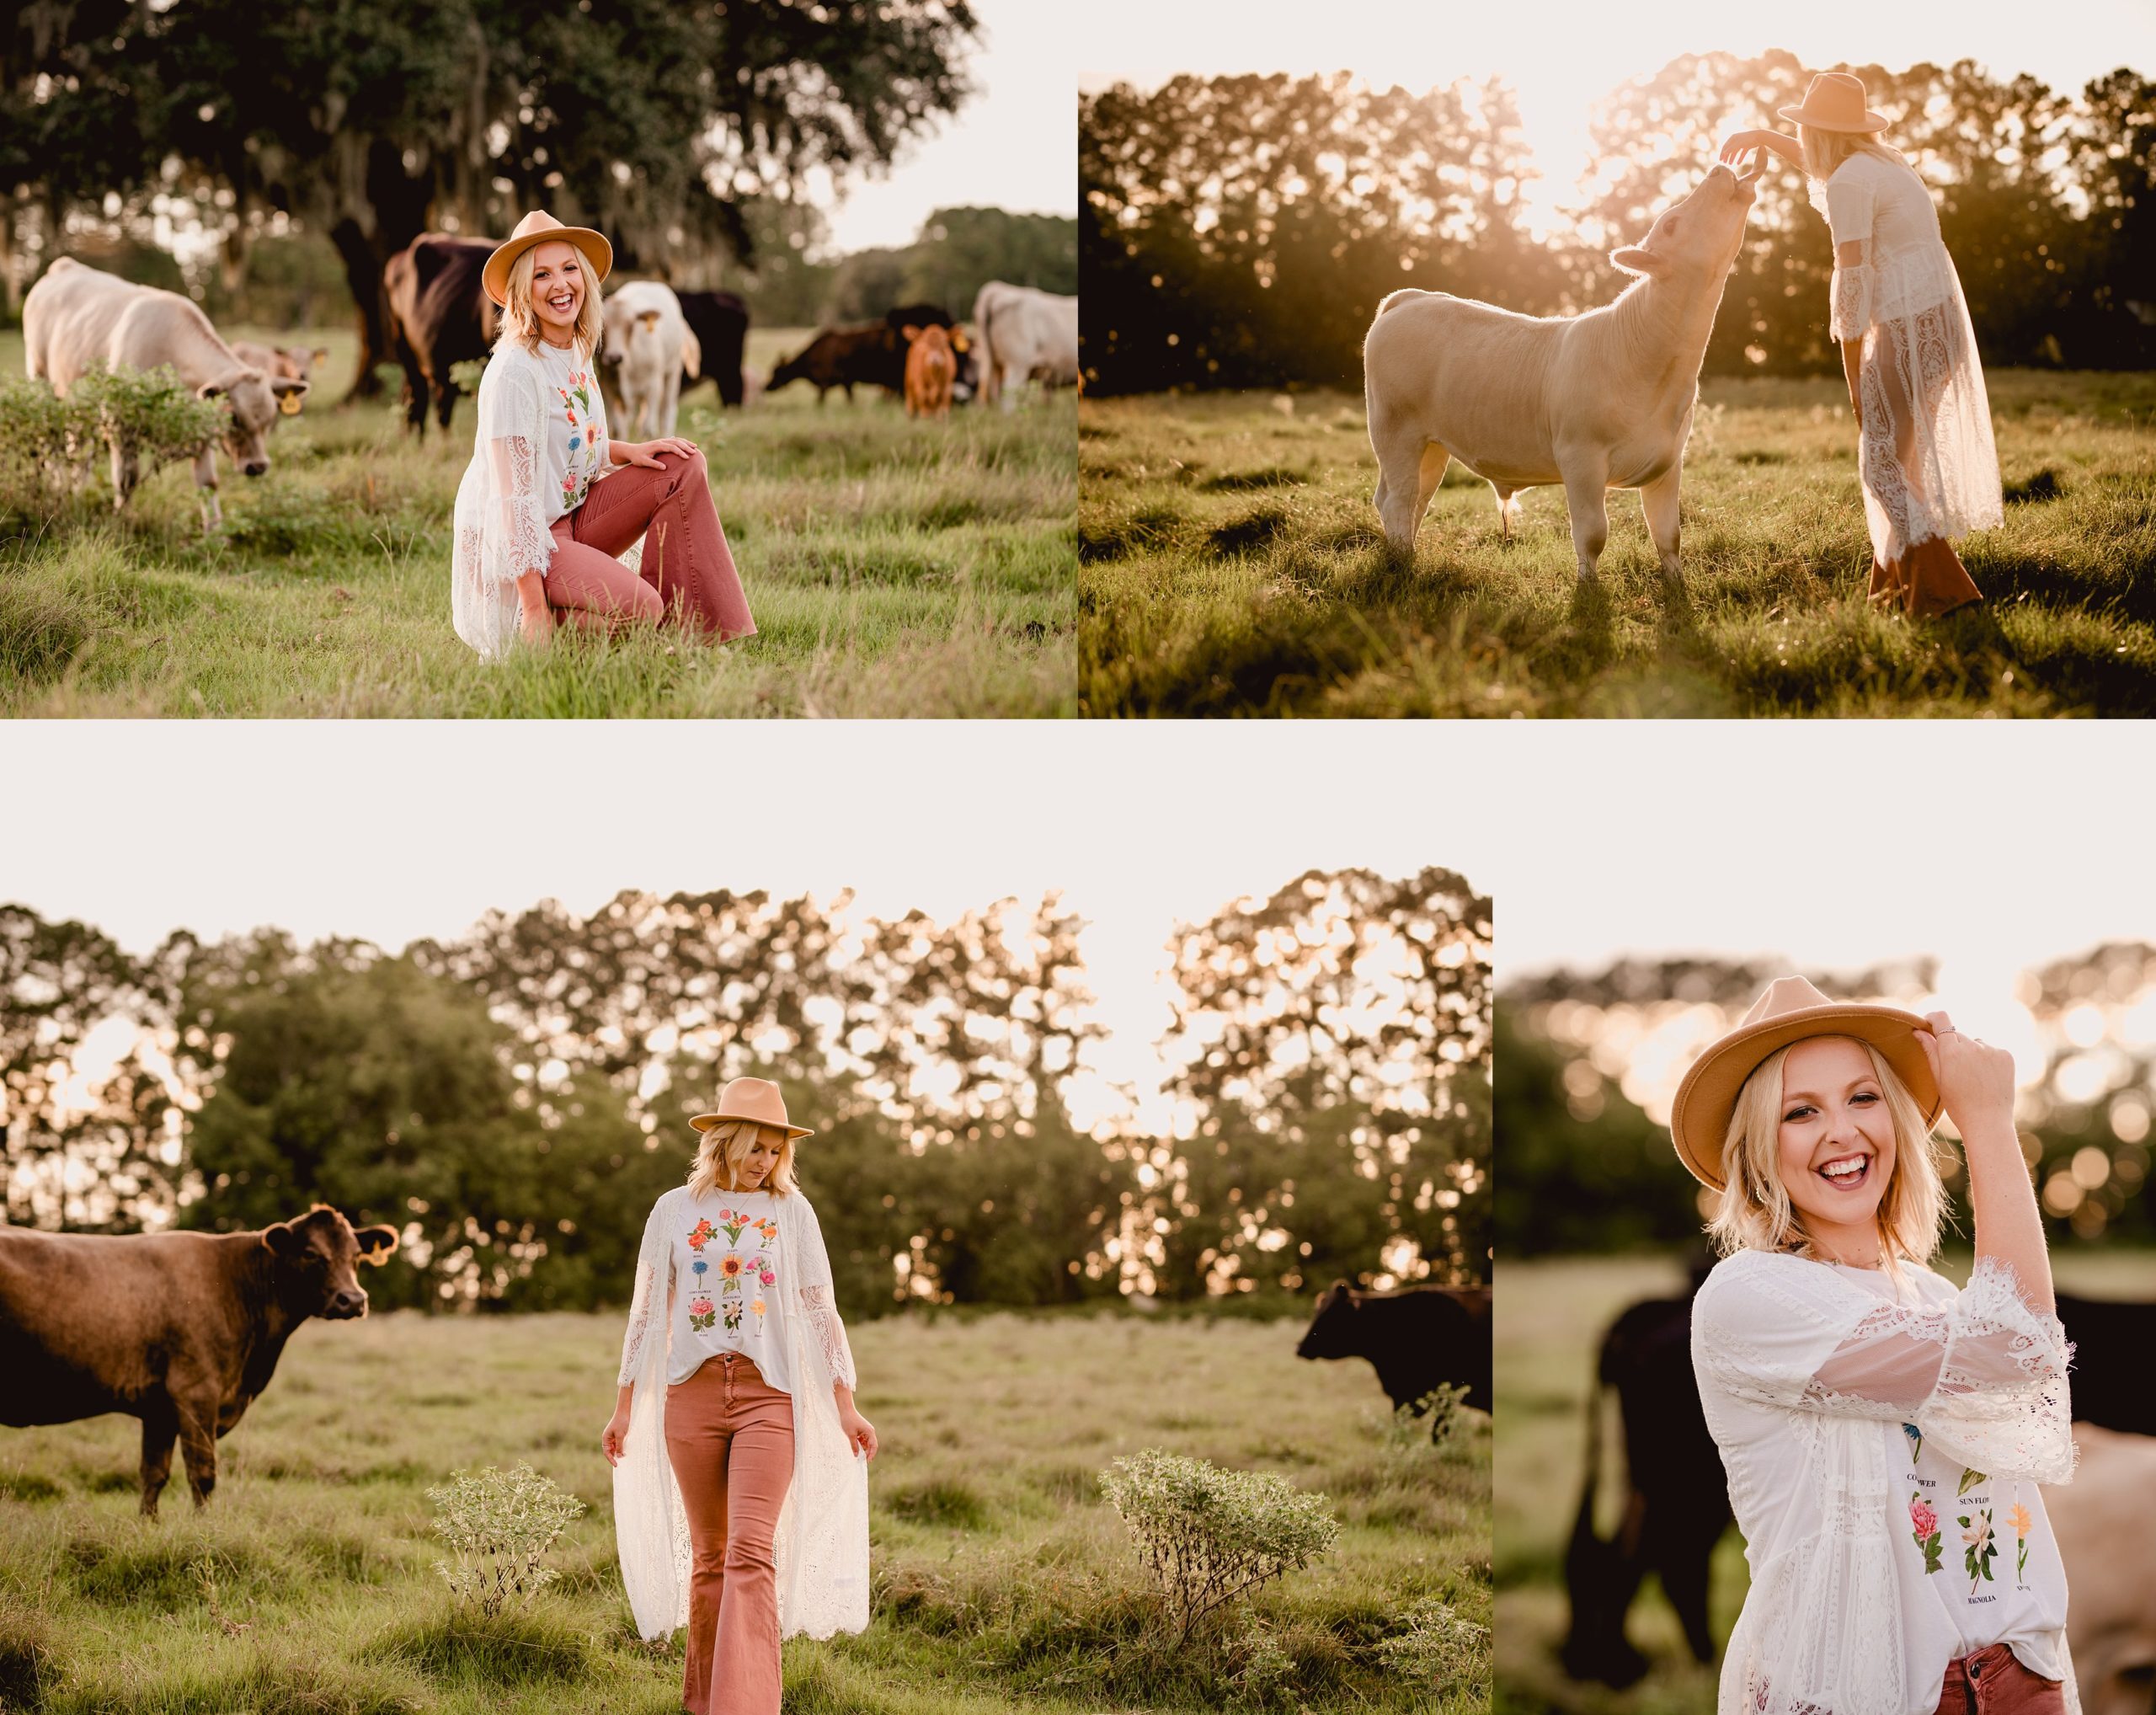 Senior pictures taken with cows on a farm in North Florida by pro photographer.